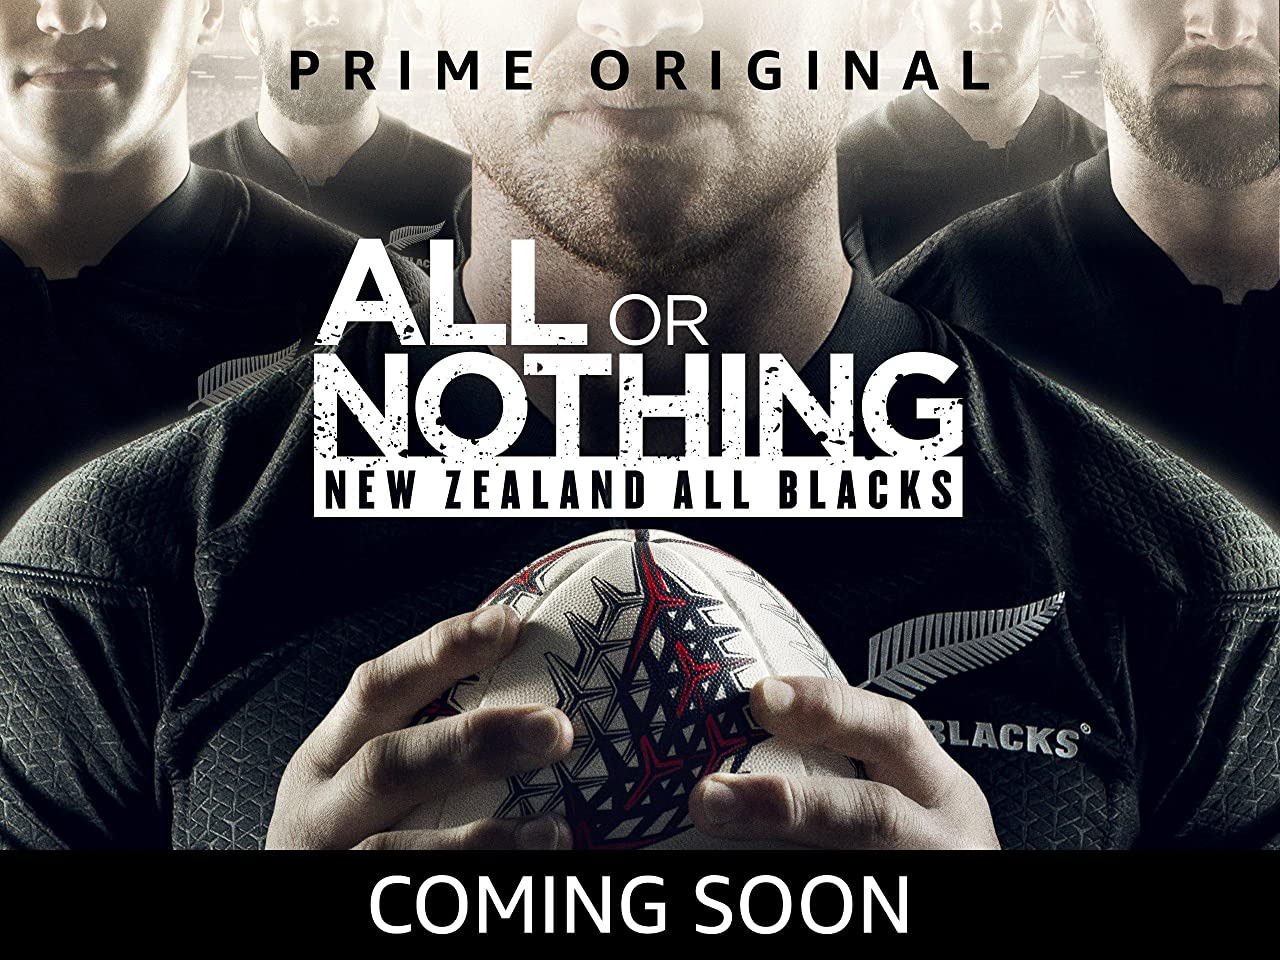 Show All or Nothing: New Zealand All Blacks